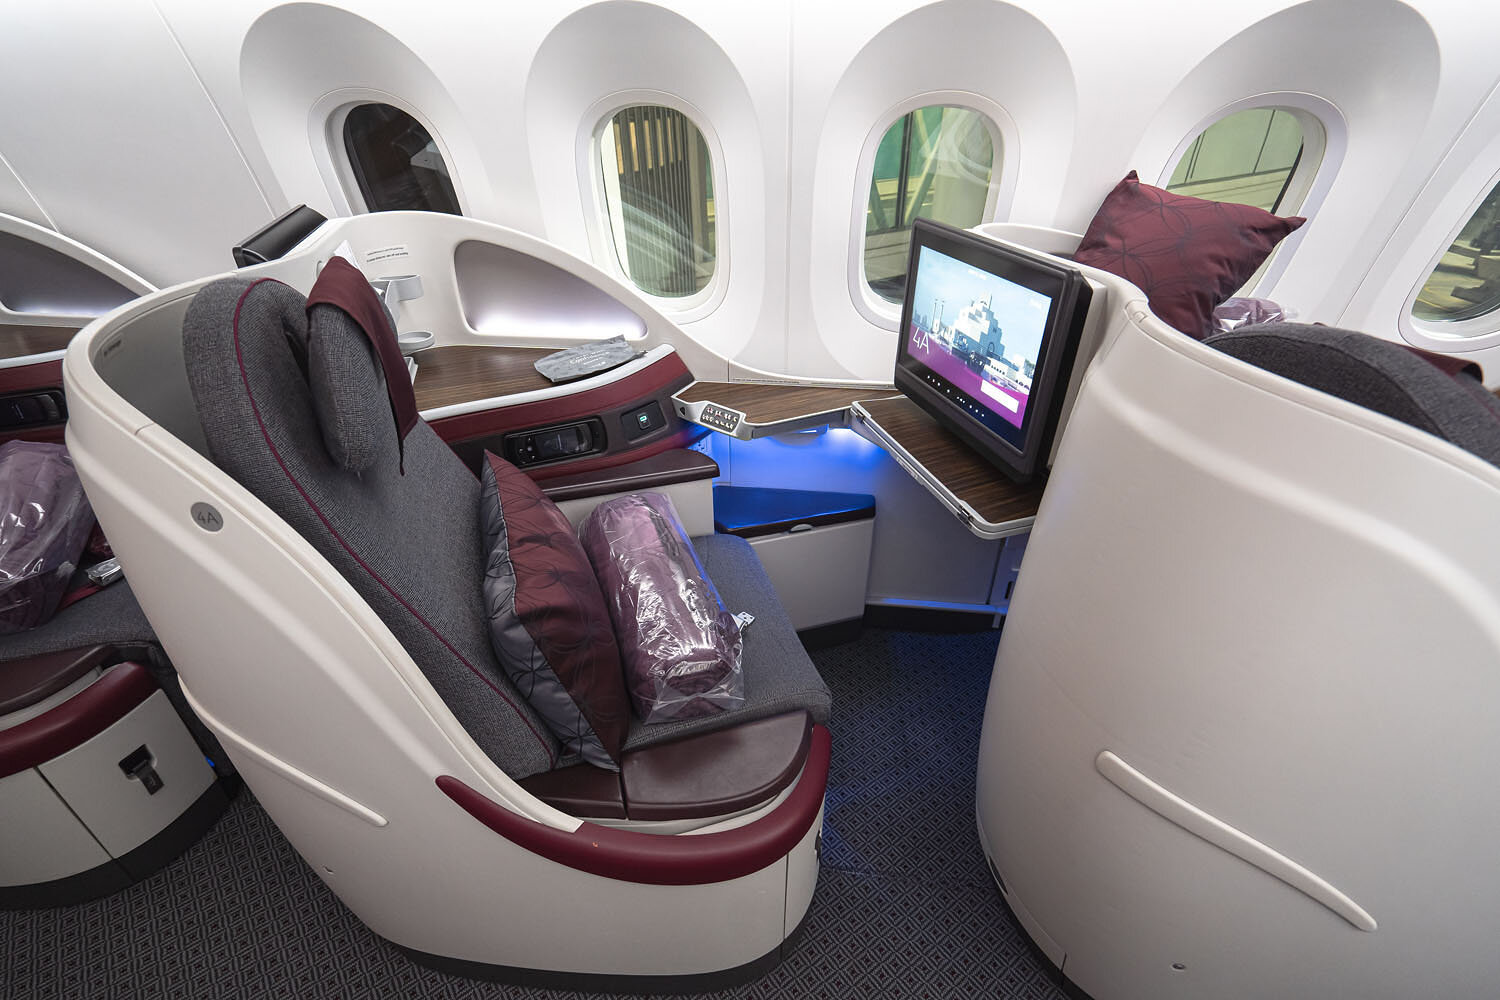 Qatar Airways' Business Class experience during the pandemic - Suitesmile